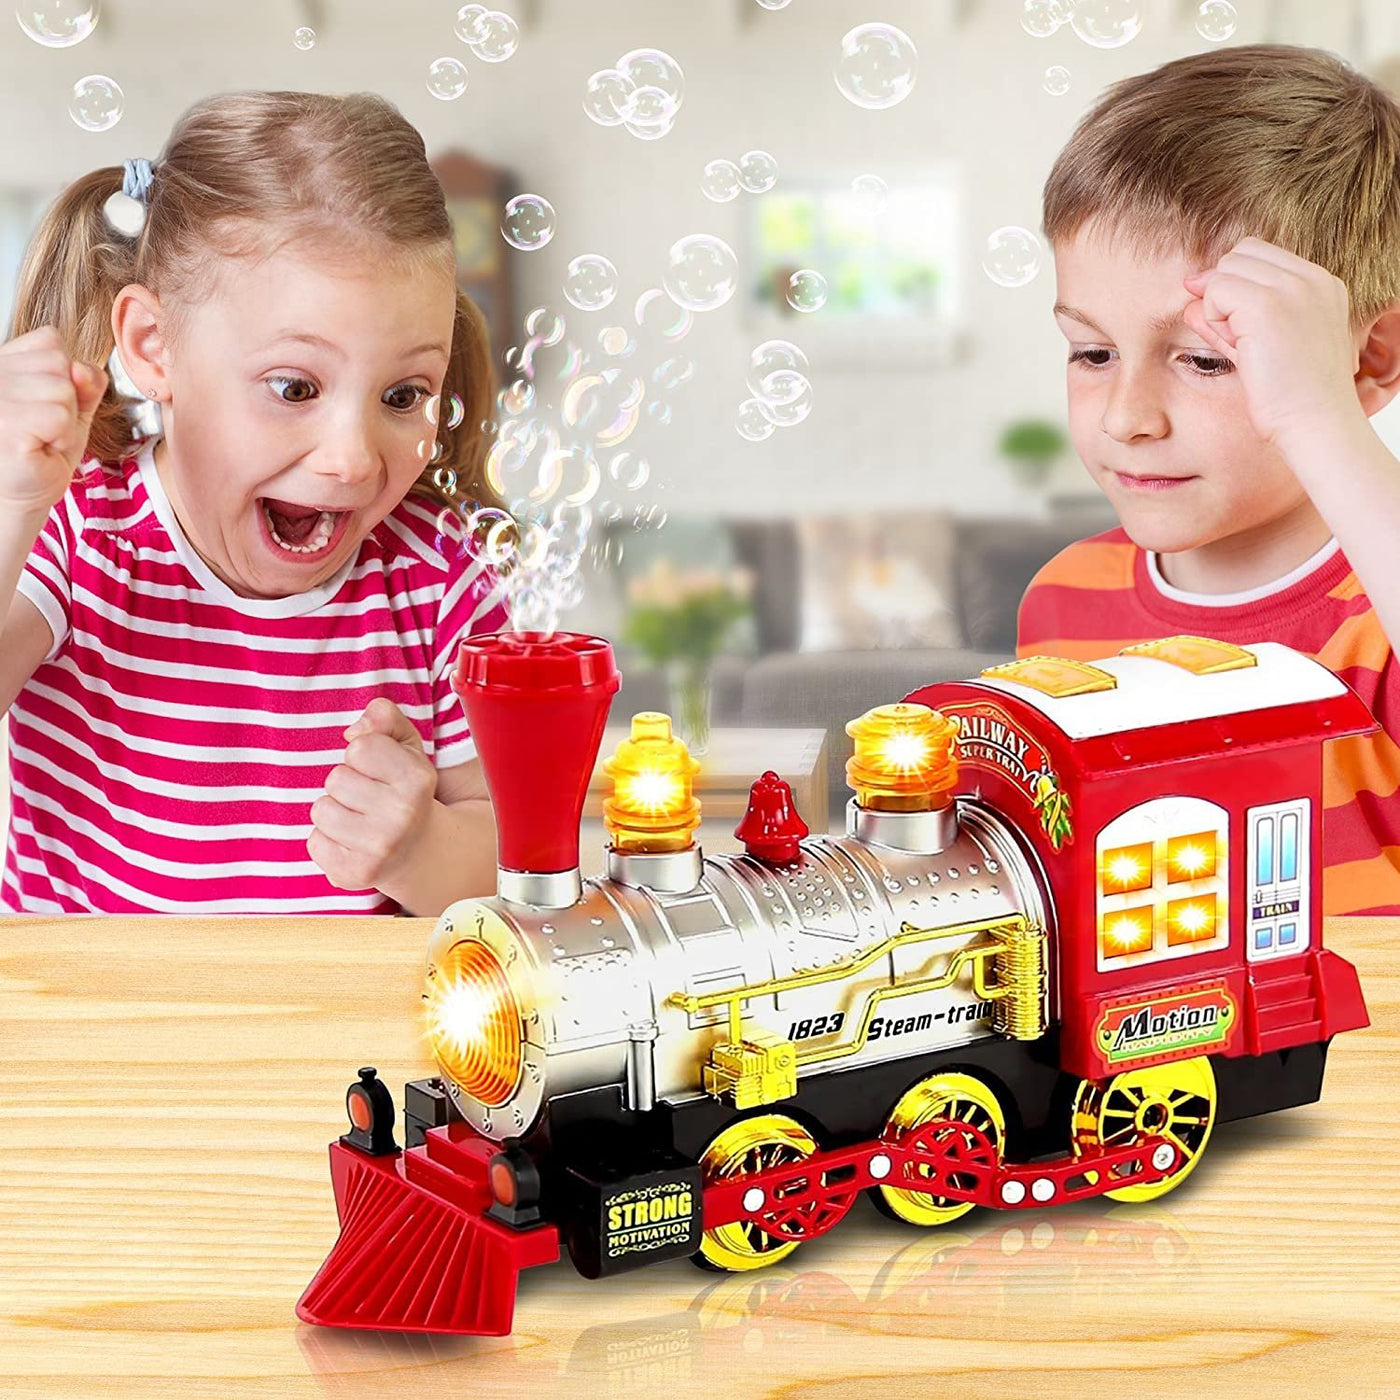 Bubble Blowing Toy Train with Lights & Sounds - Bump & Go Steam Locomotive for Kids